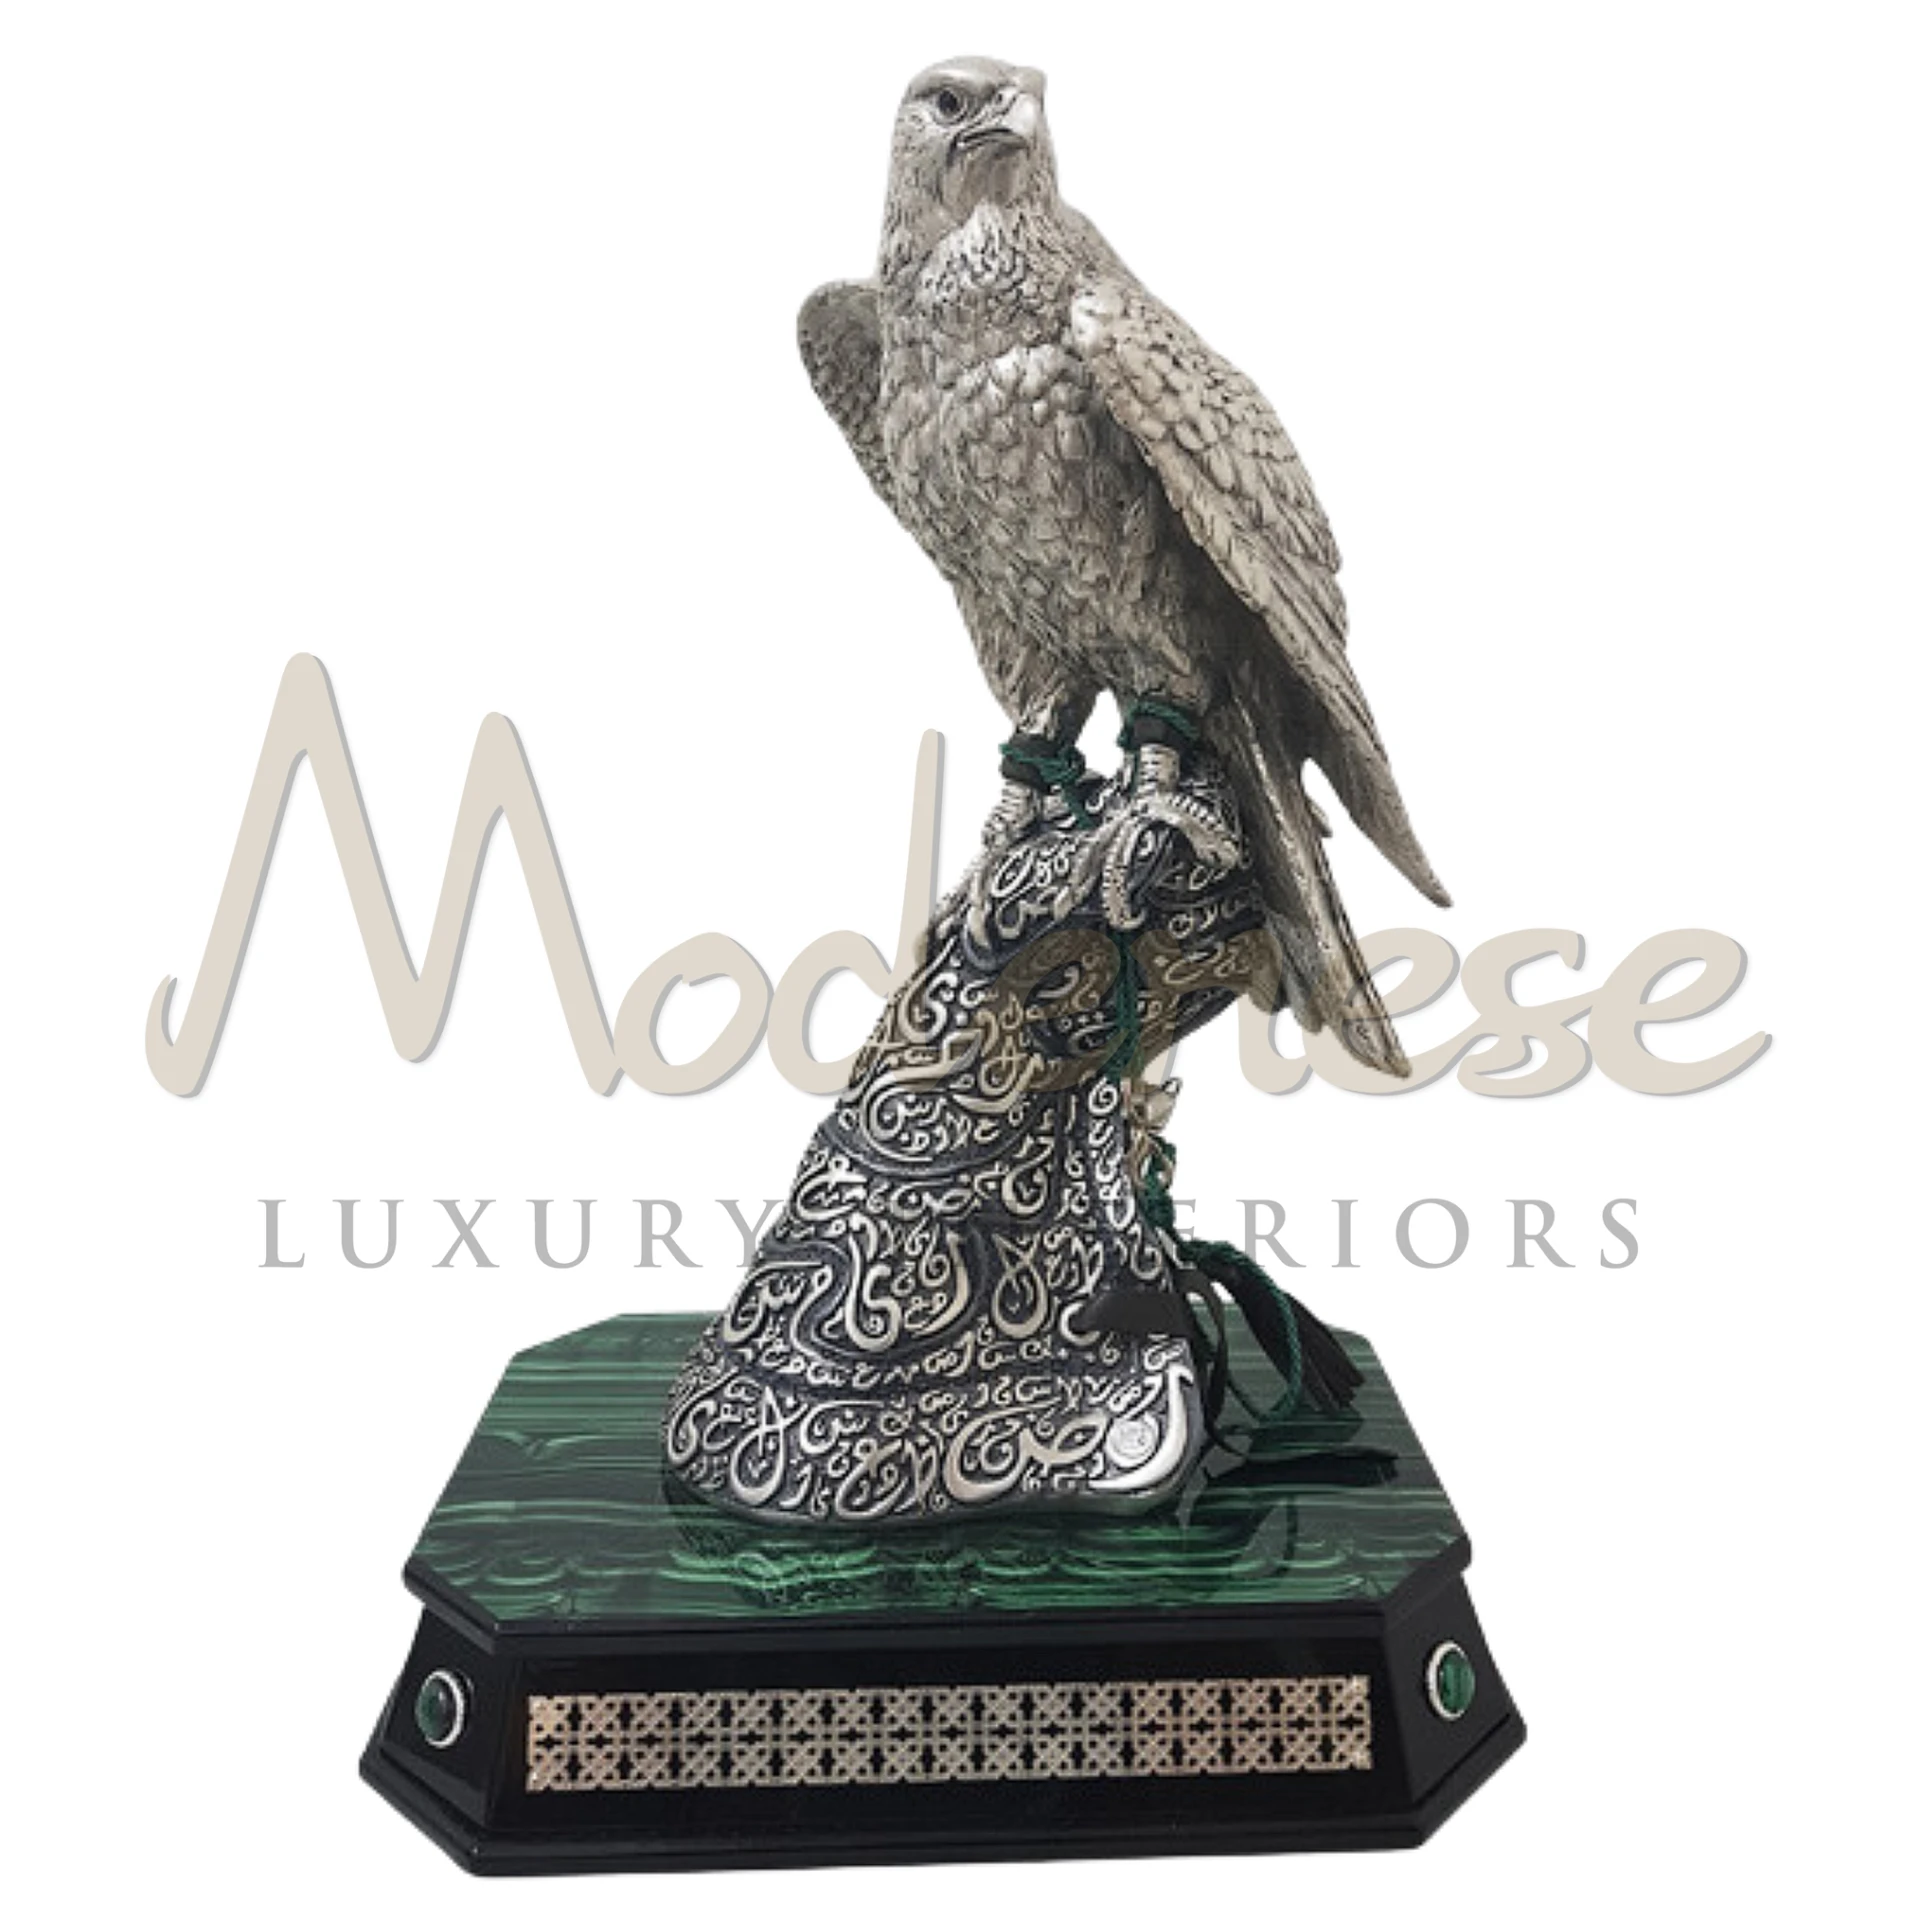 Luxury Falcon ornament, exquisitely crafted in silver, glass, or crystal, showcasing the elegance and grace of a falcon in flight for sophisticated décor.